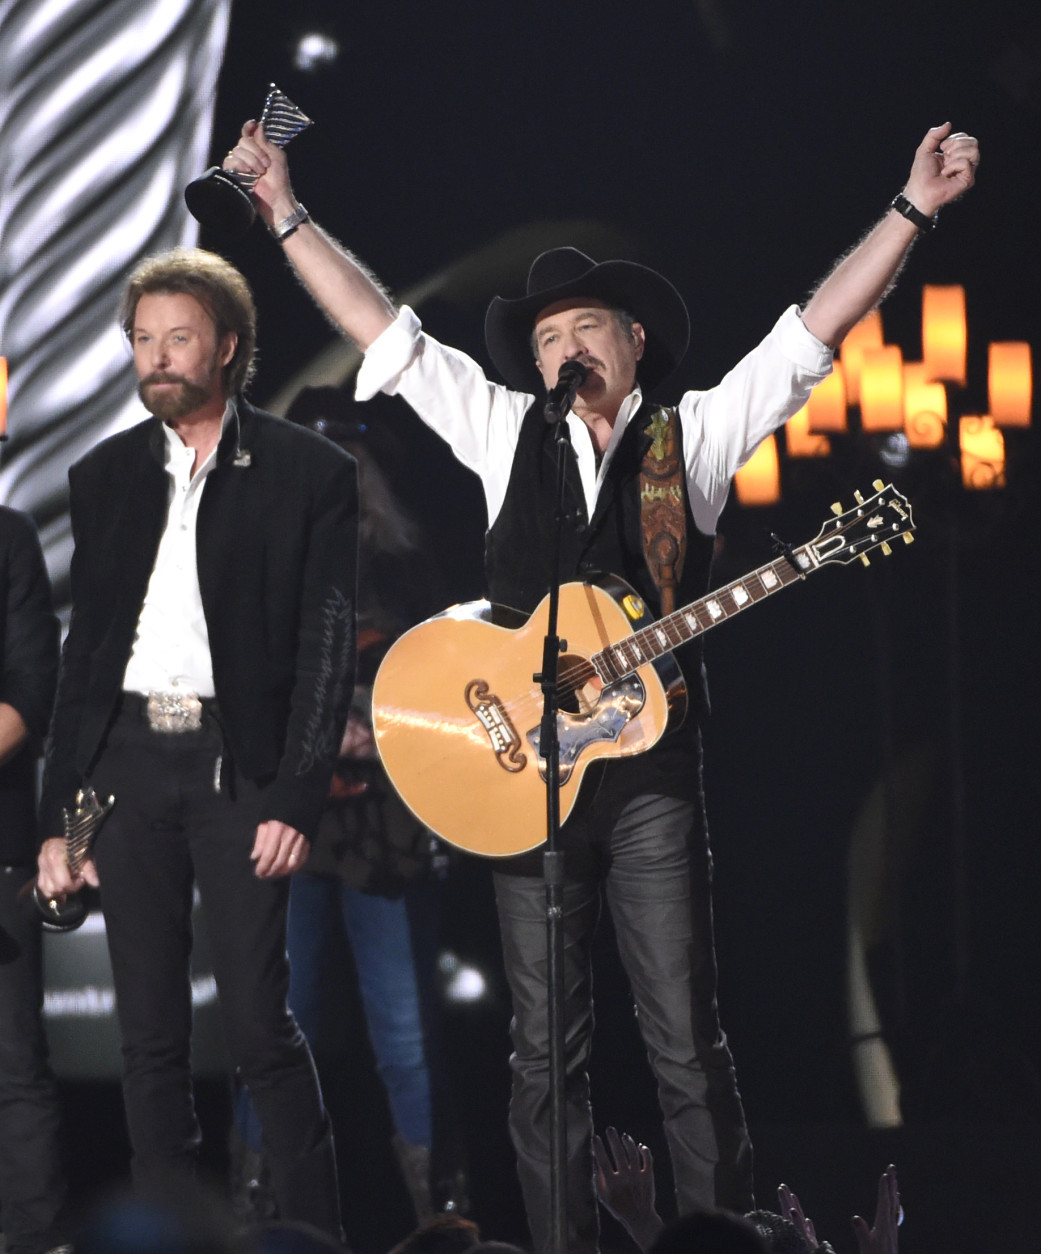 Ronnie Dunn, left, and Kix Brooks, of Brooks &amp; Dunn, accept the milestone award at the 50th annual Academy of Country Music Awards at AT&amp;T Stadium on Sunday, April 19, 2015, in Arlington, Texas. (Photo by Chris Pizzello/Invision/AP)